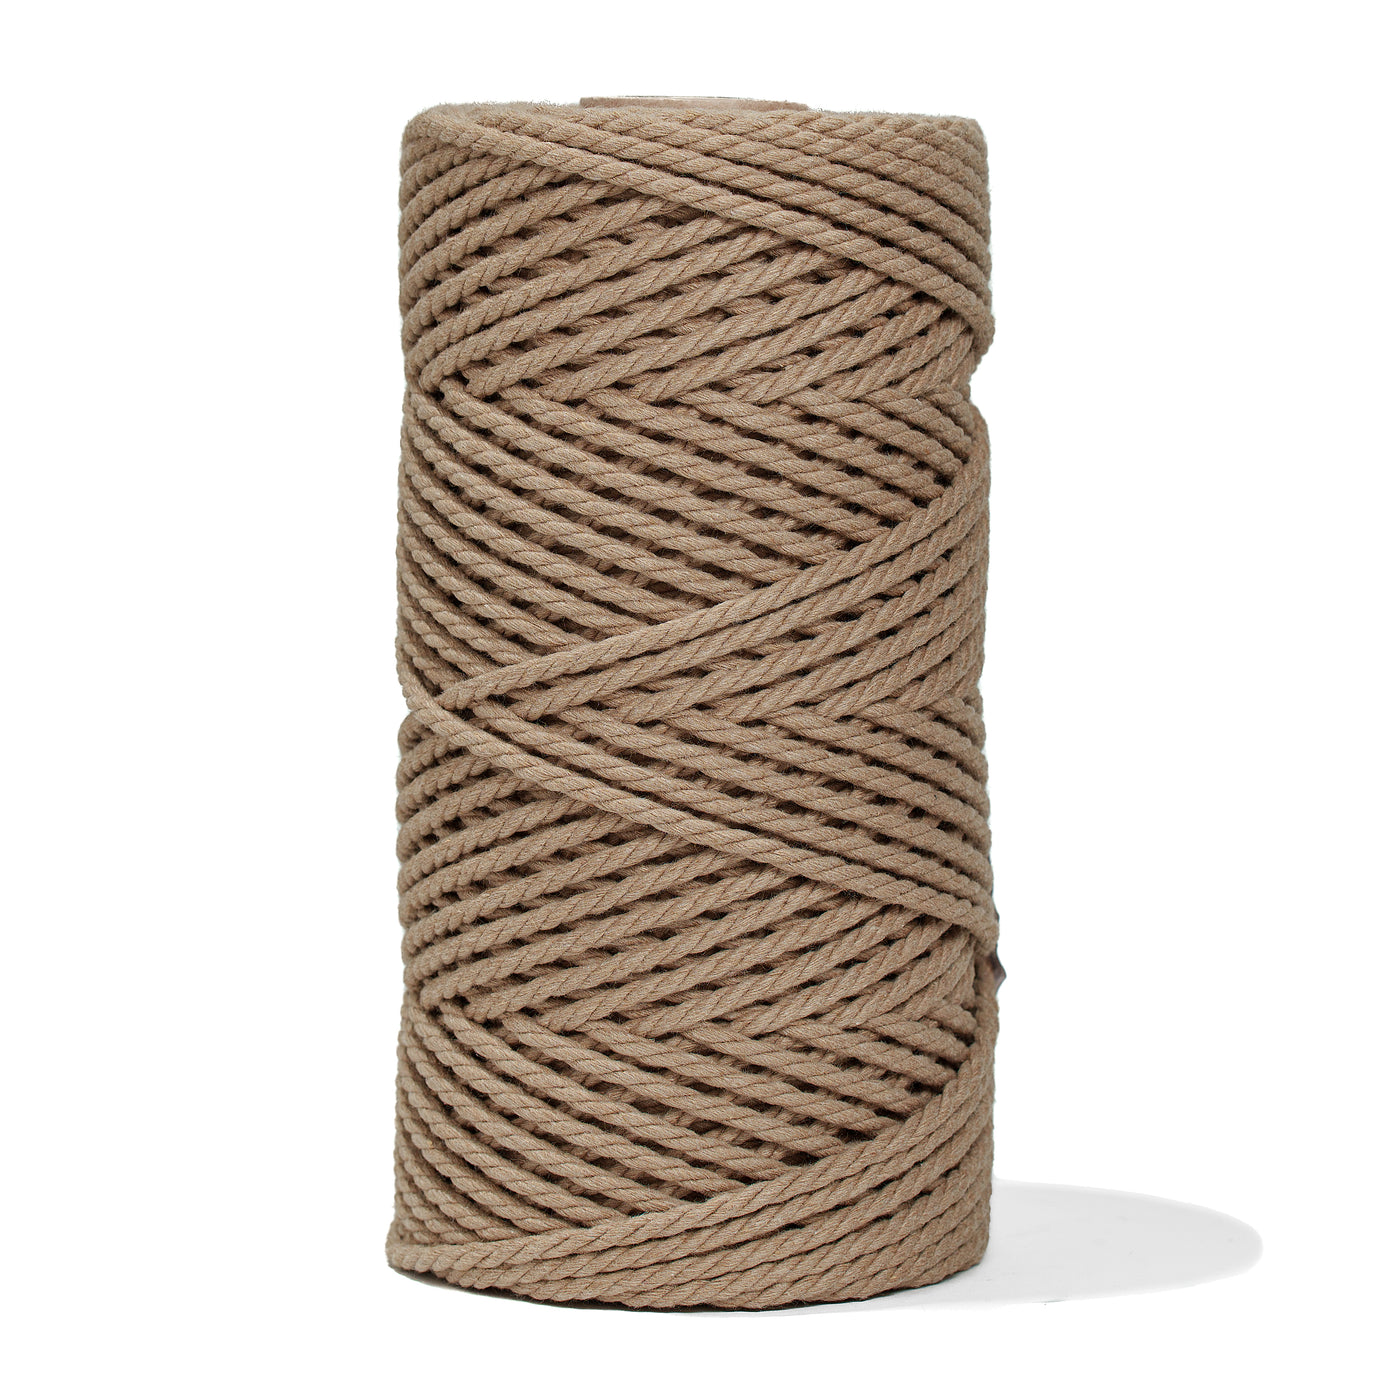 COTTON ROPE ZERO WASTE 3 MM - 3 PLY - DUNE COLOR